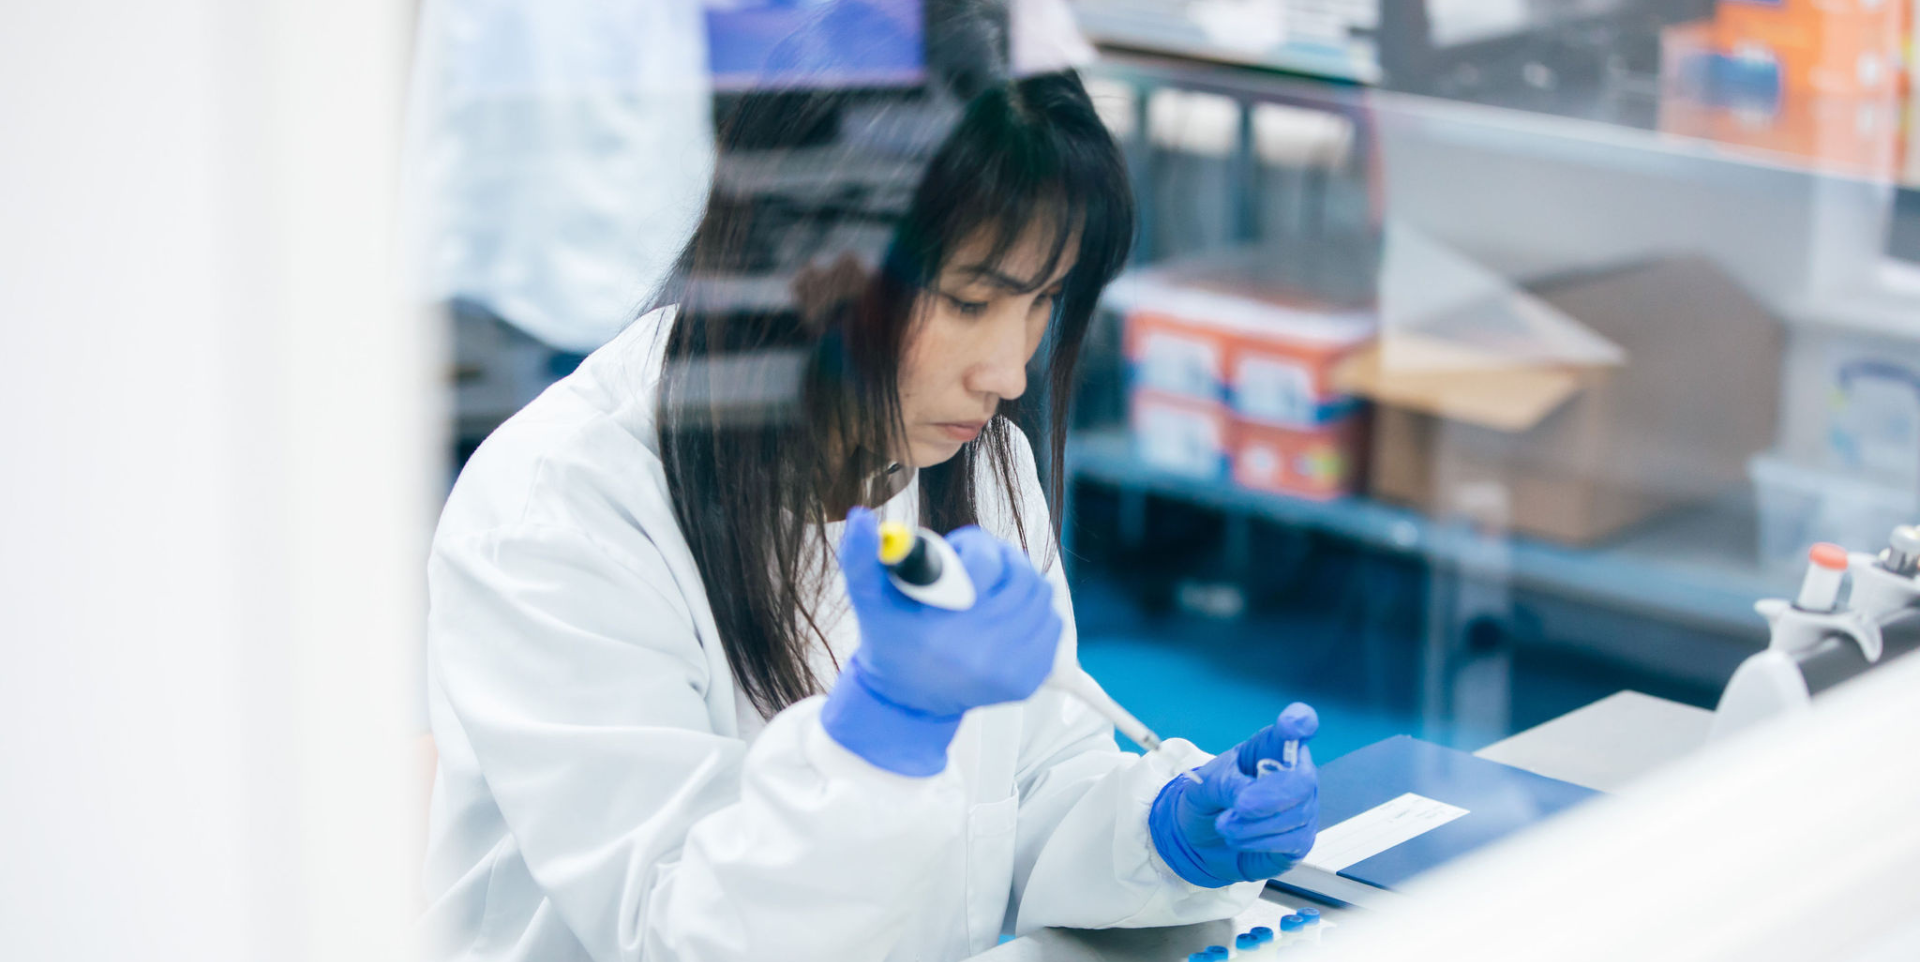 Government initiatives for life sciences: image depicts a scientist working in a lab. She has long black hair and is wearing a white lab coat and blue gloves. She is holding a pipette in her hands, and has a look of concentration on her face.